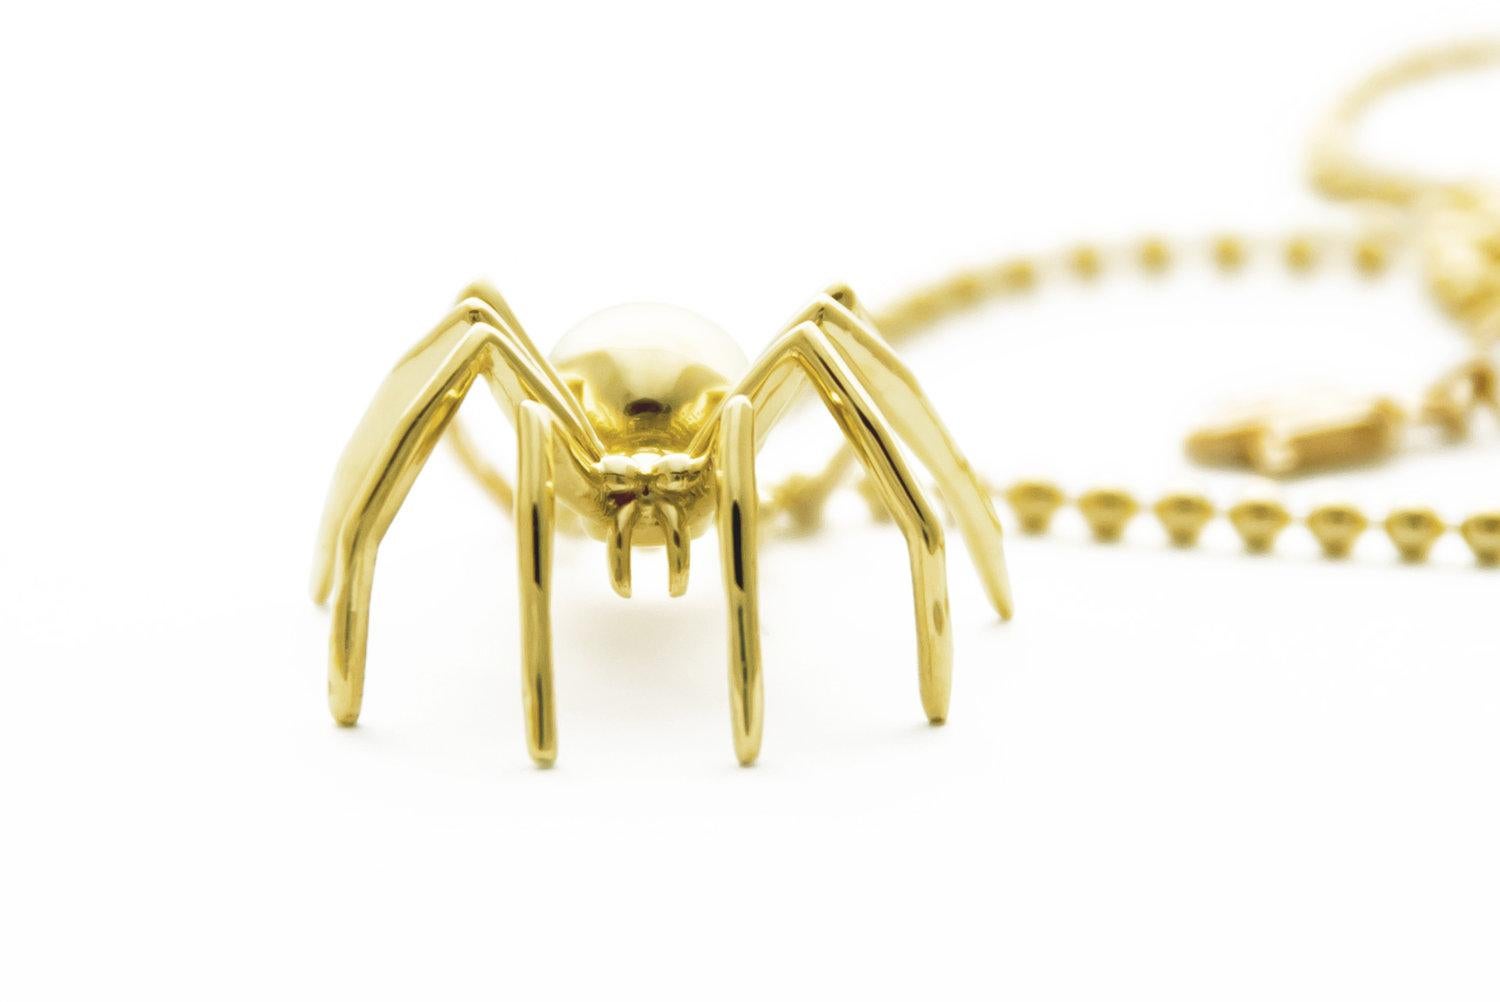 Presenting the exquisite Large Spider Pendant Solid Yellow Gold, a testament to the profound symbolism of creativity and self-determination embodied by the spider. Crafted with utmost precision and artistry, this pendant serves as a magnificent